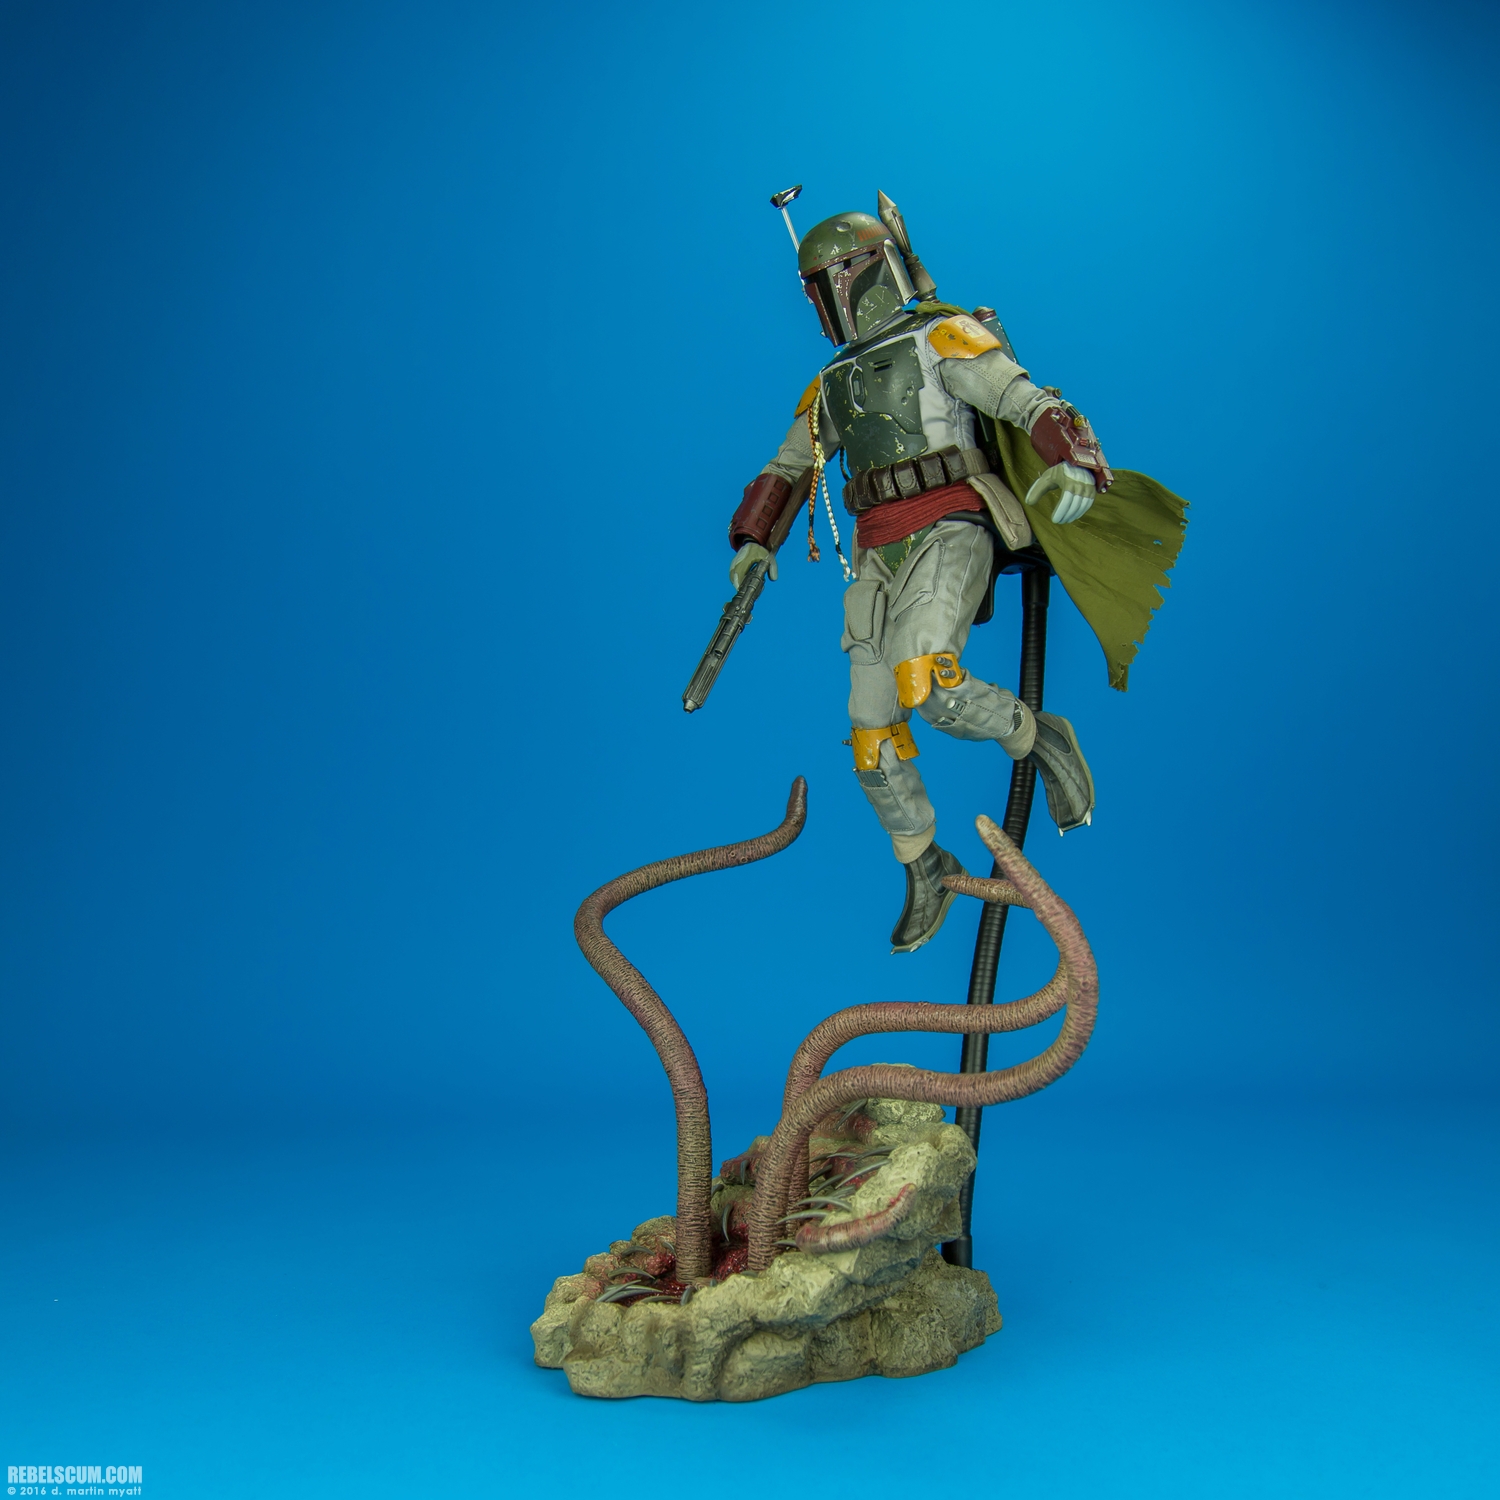 Hot-Toys-MMS313-Boba-Fett-Deluxe-Collectible-Figure-015.jpg